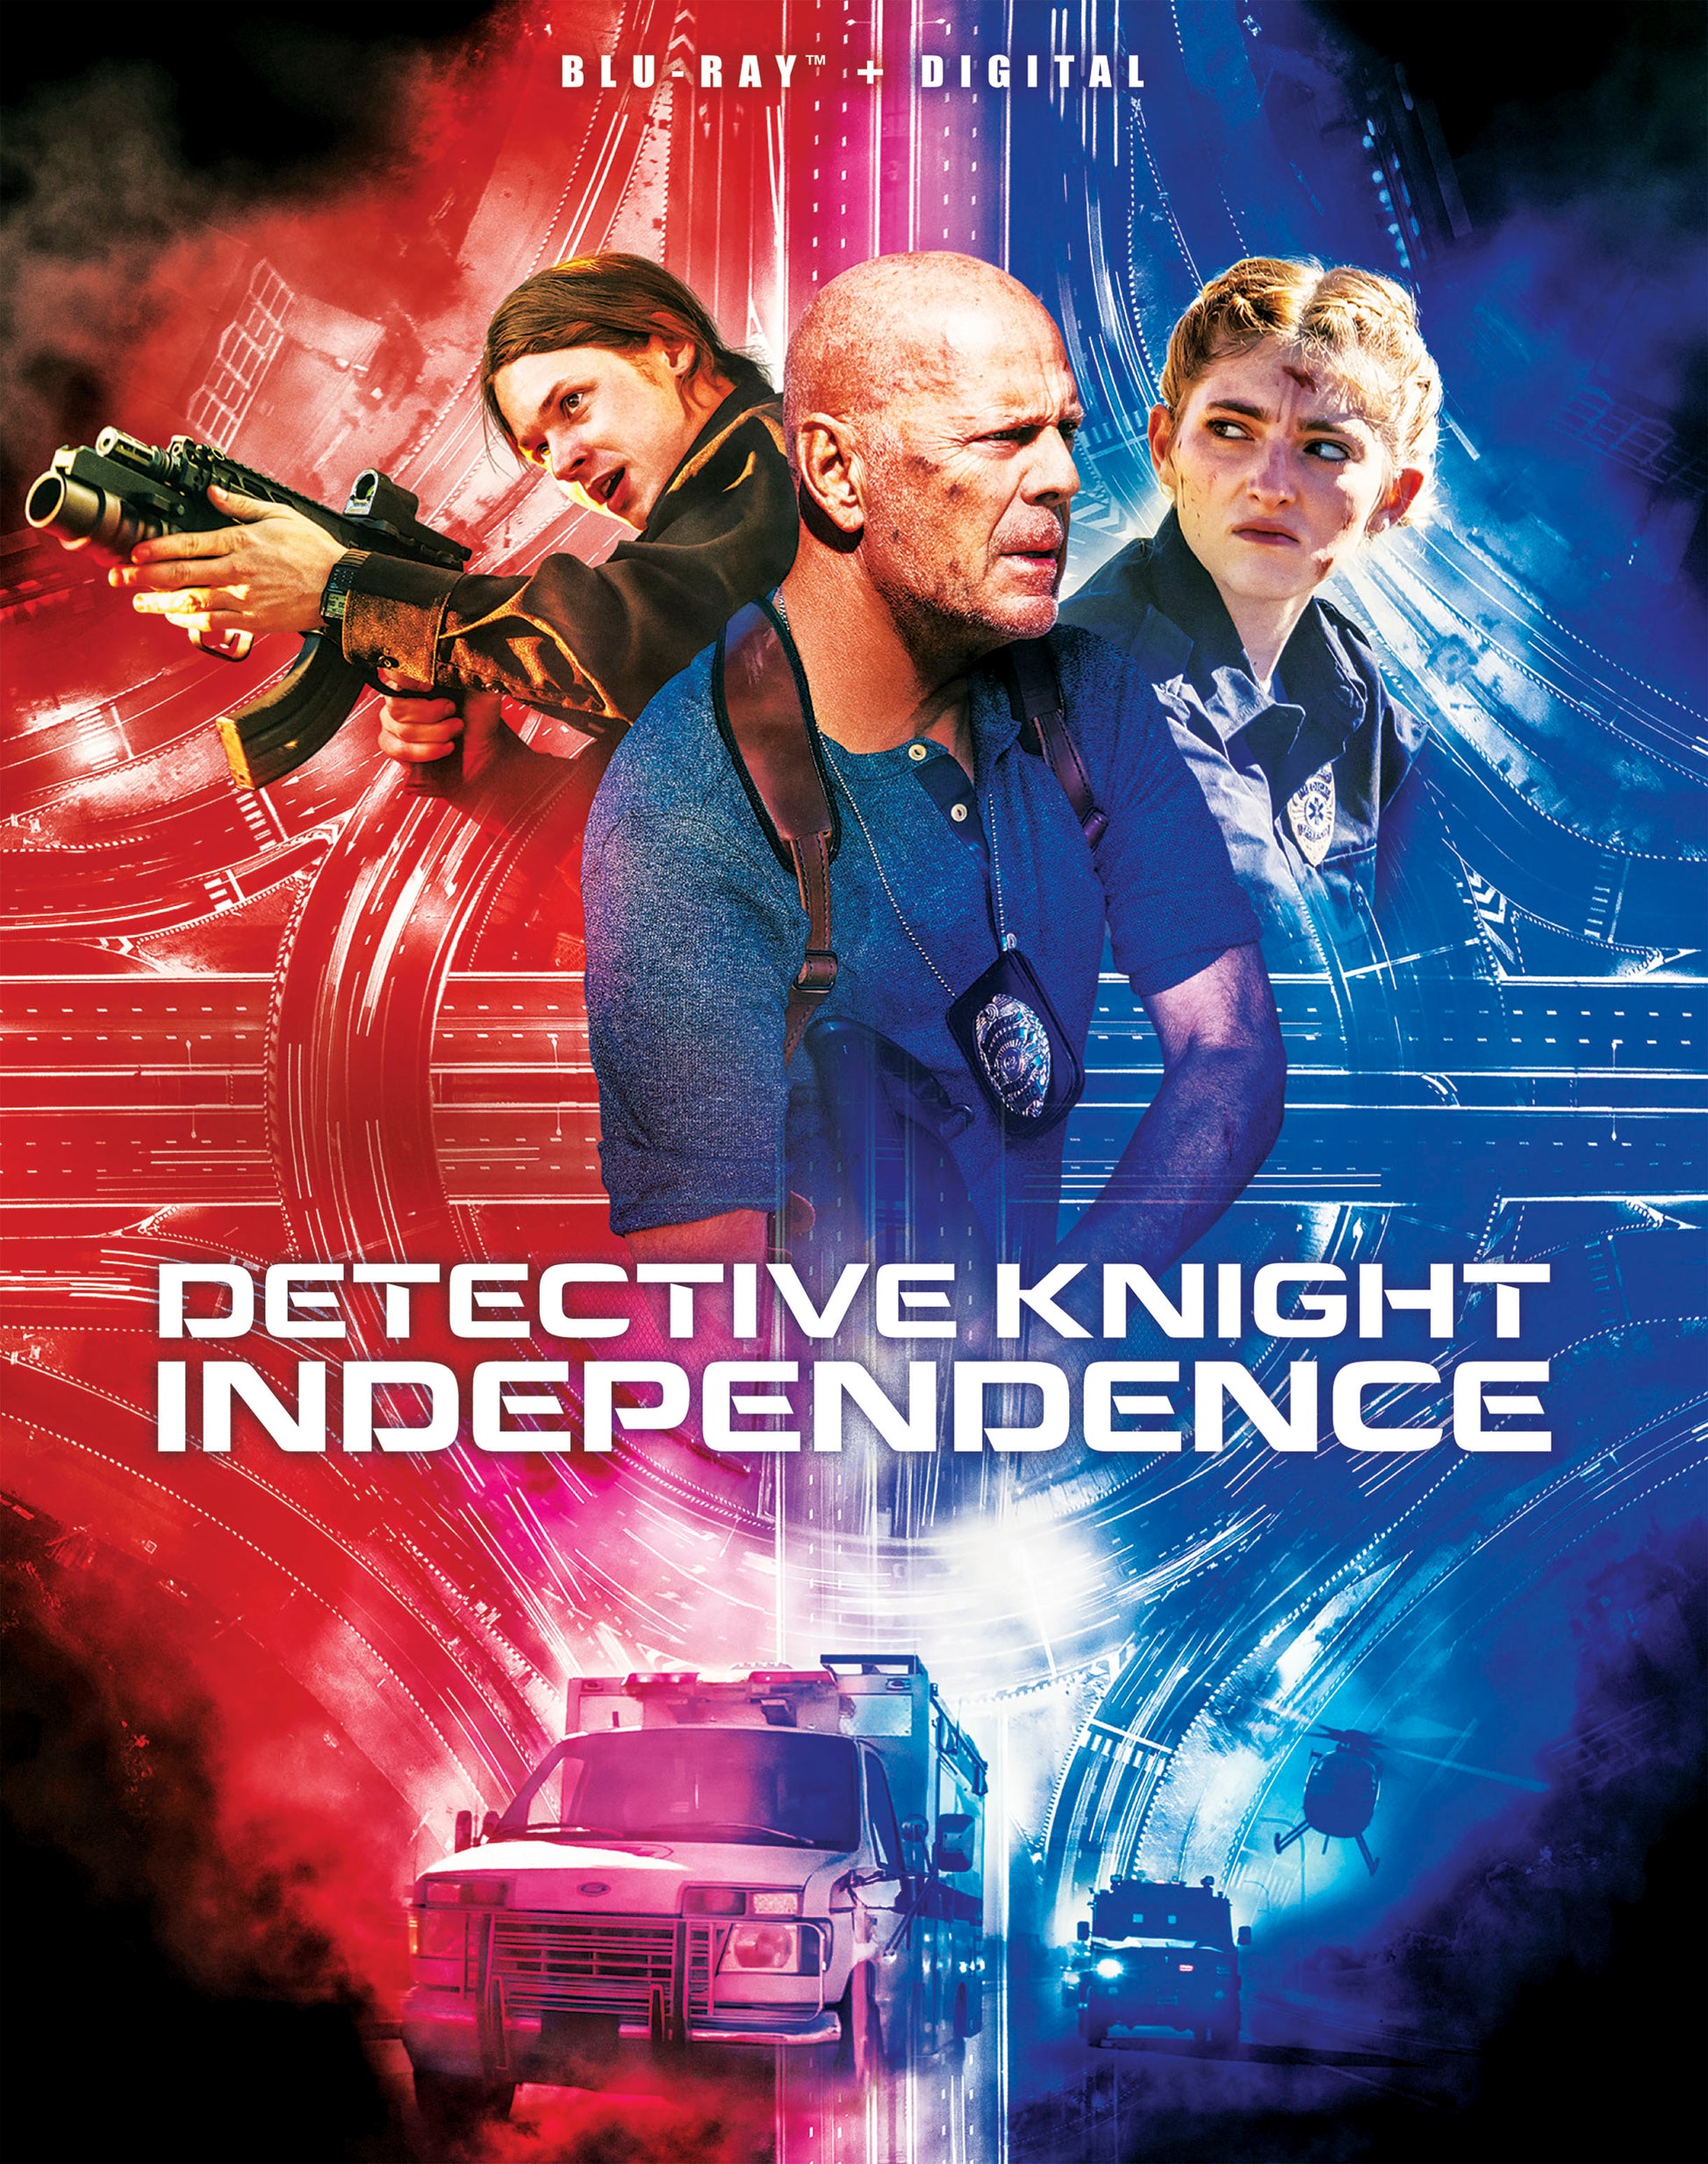 Detective Knight: Independence [Includes Digital Copy] [Blu-ray] cover art